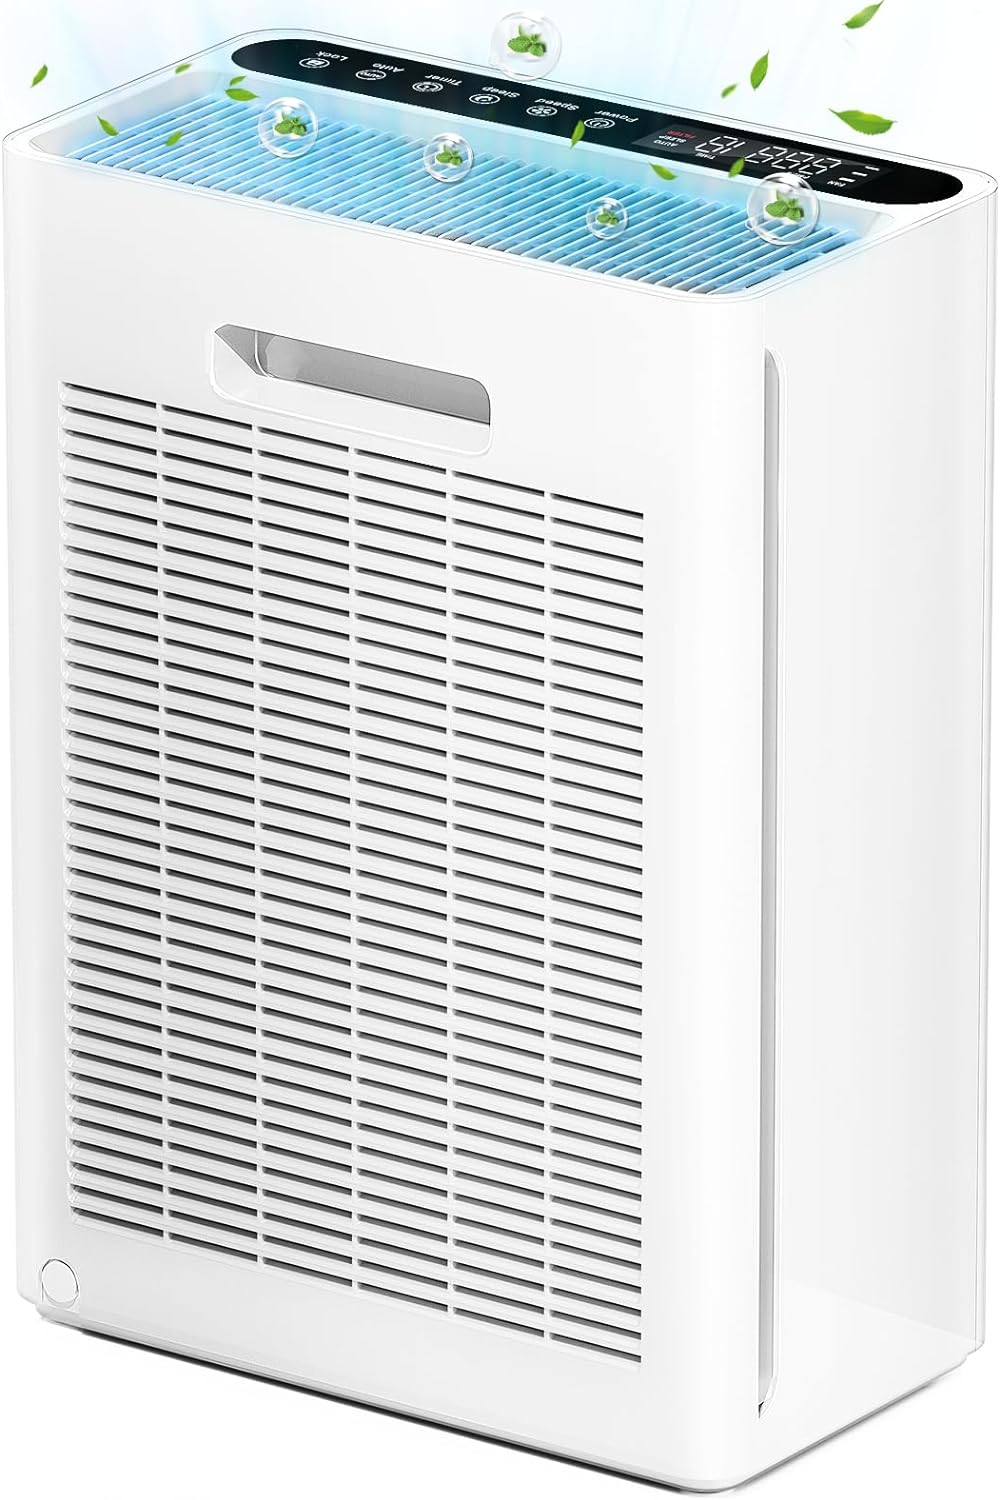 These filters work great. Living near a very busy highway and a lot of construction in our area. The Tailulu H13 True HEPA Air Purifier has worked great at removing the small dust particles in the air. It' obvious how well it works when you need replace the old filter with this new one.